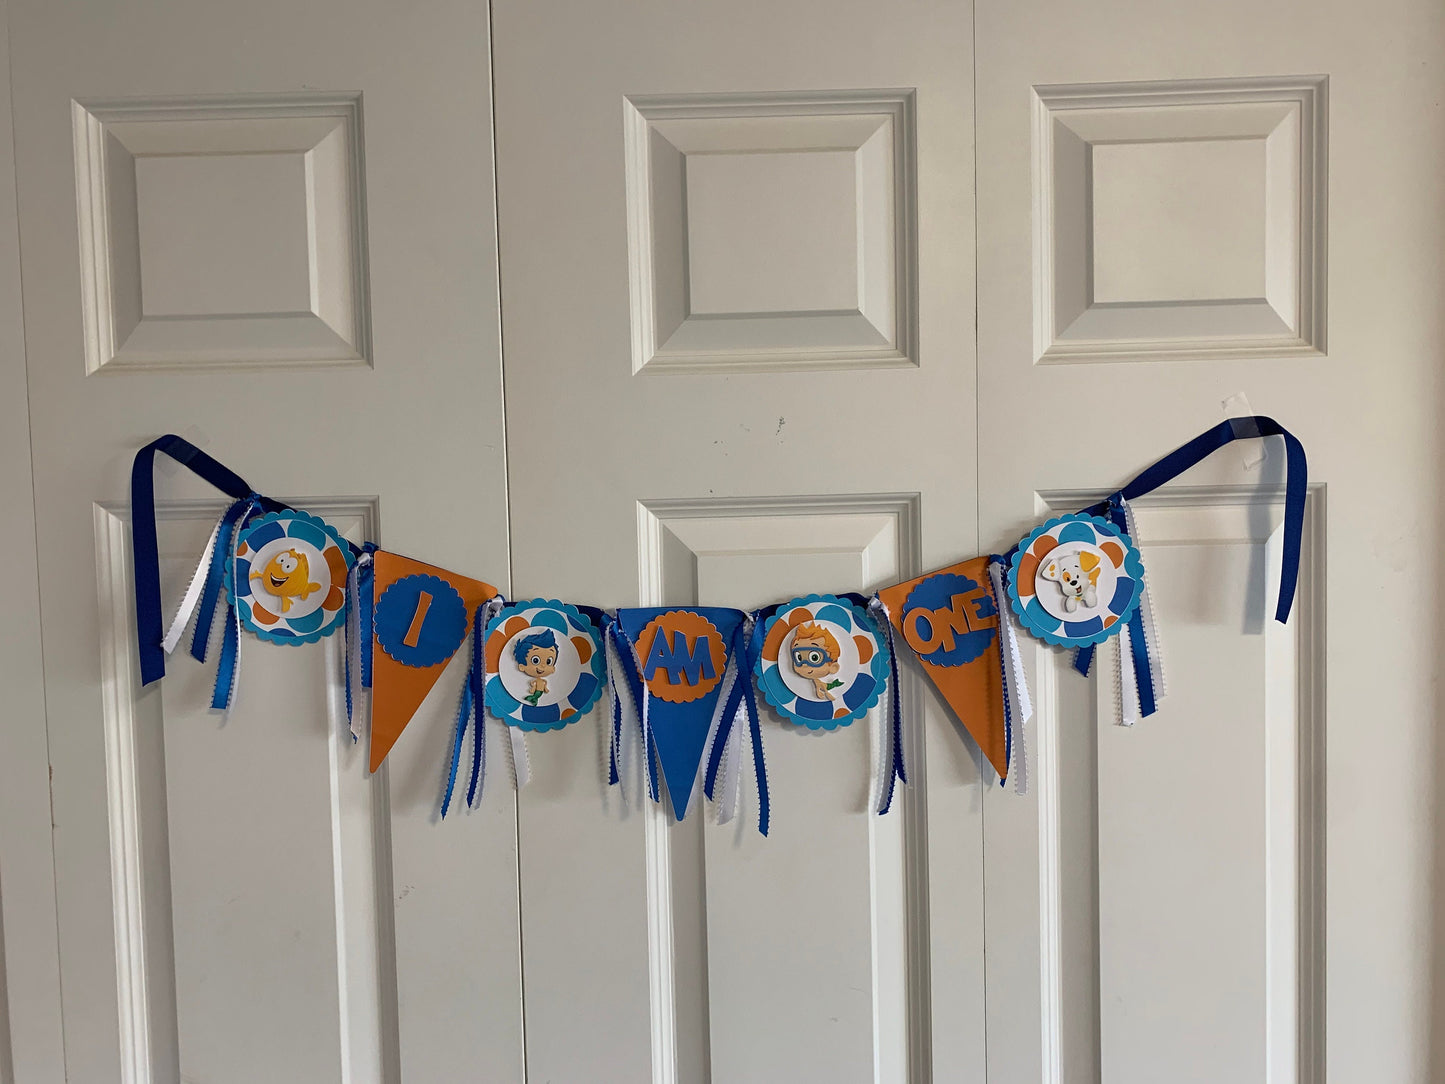 Bubble Guppies Highchair banner/I am one banner featuring Bubble Guppies